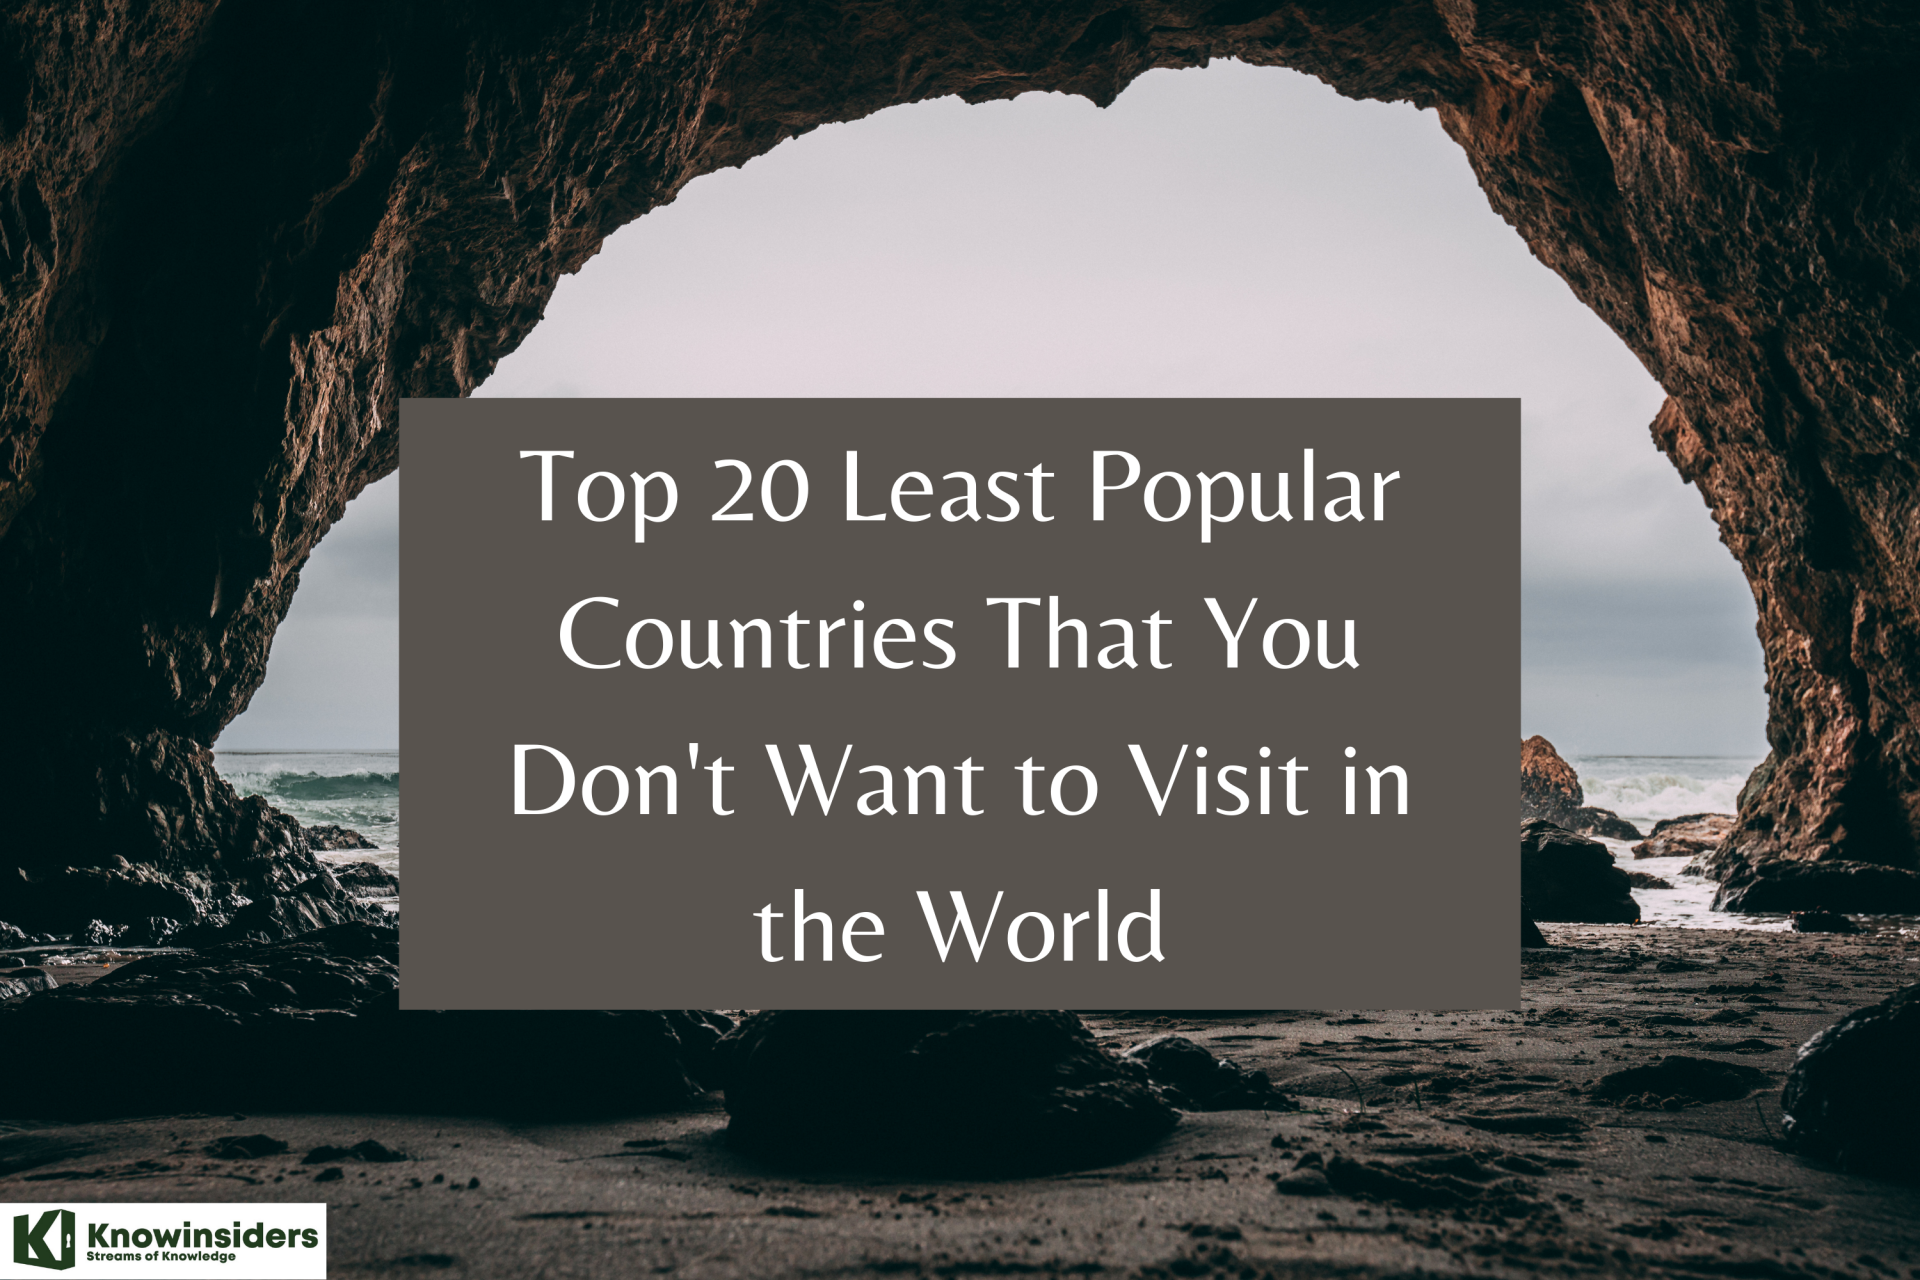 Top 20 Least Popular Countries That You Don't Want to Visit in the World